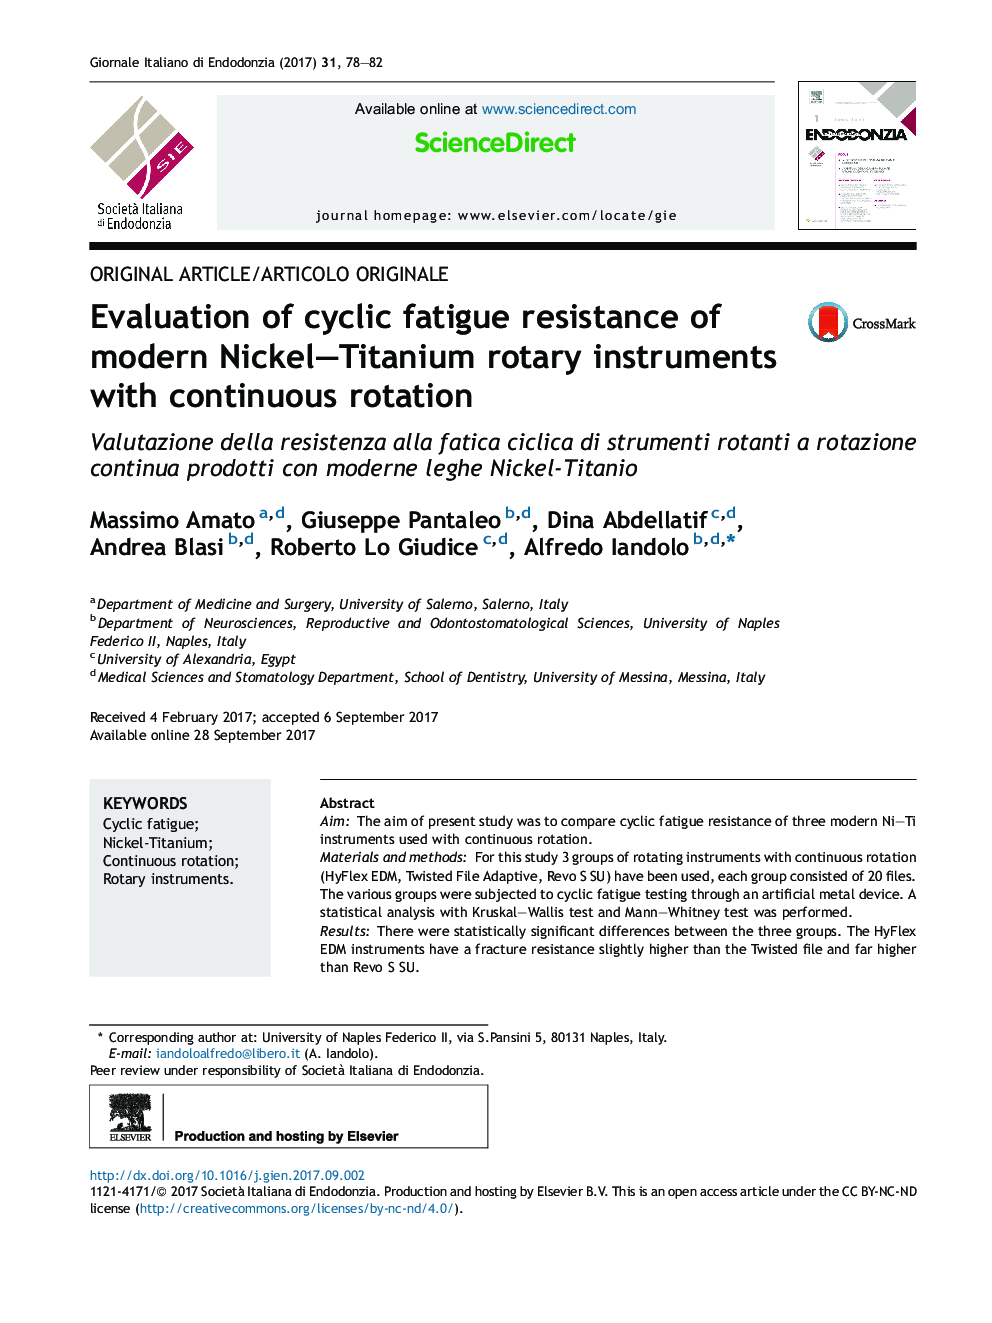 Evaluation of cyclic fatigue resistance of modern Nickel-Titanium rotary instruments with continuous rotation